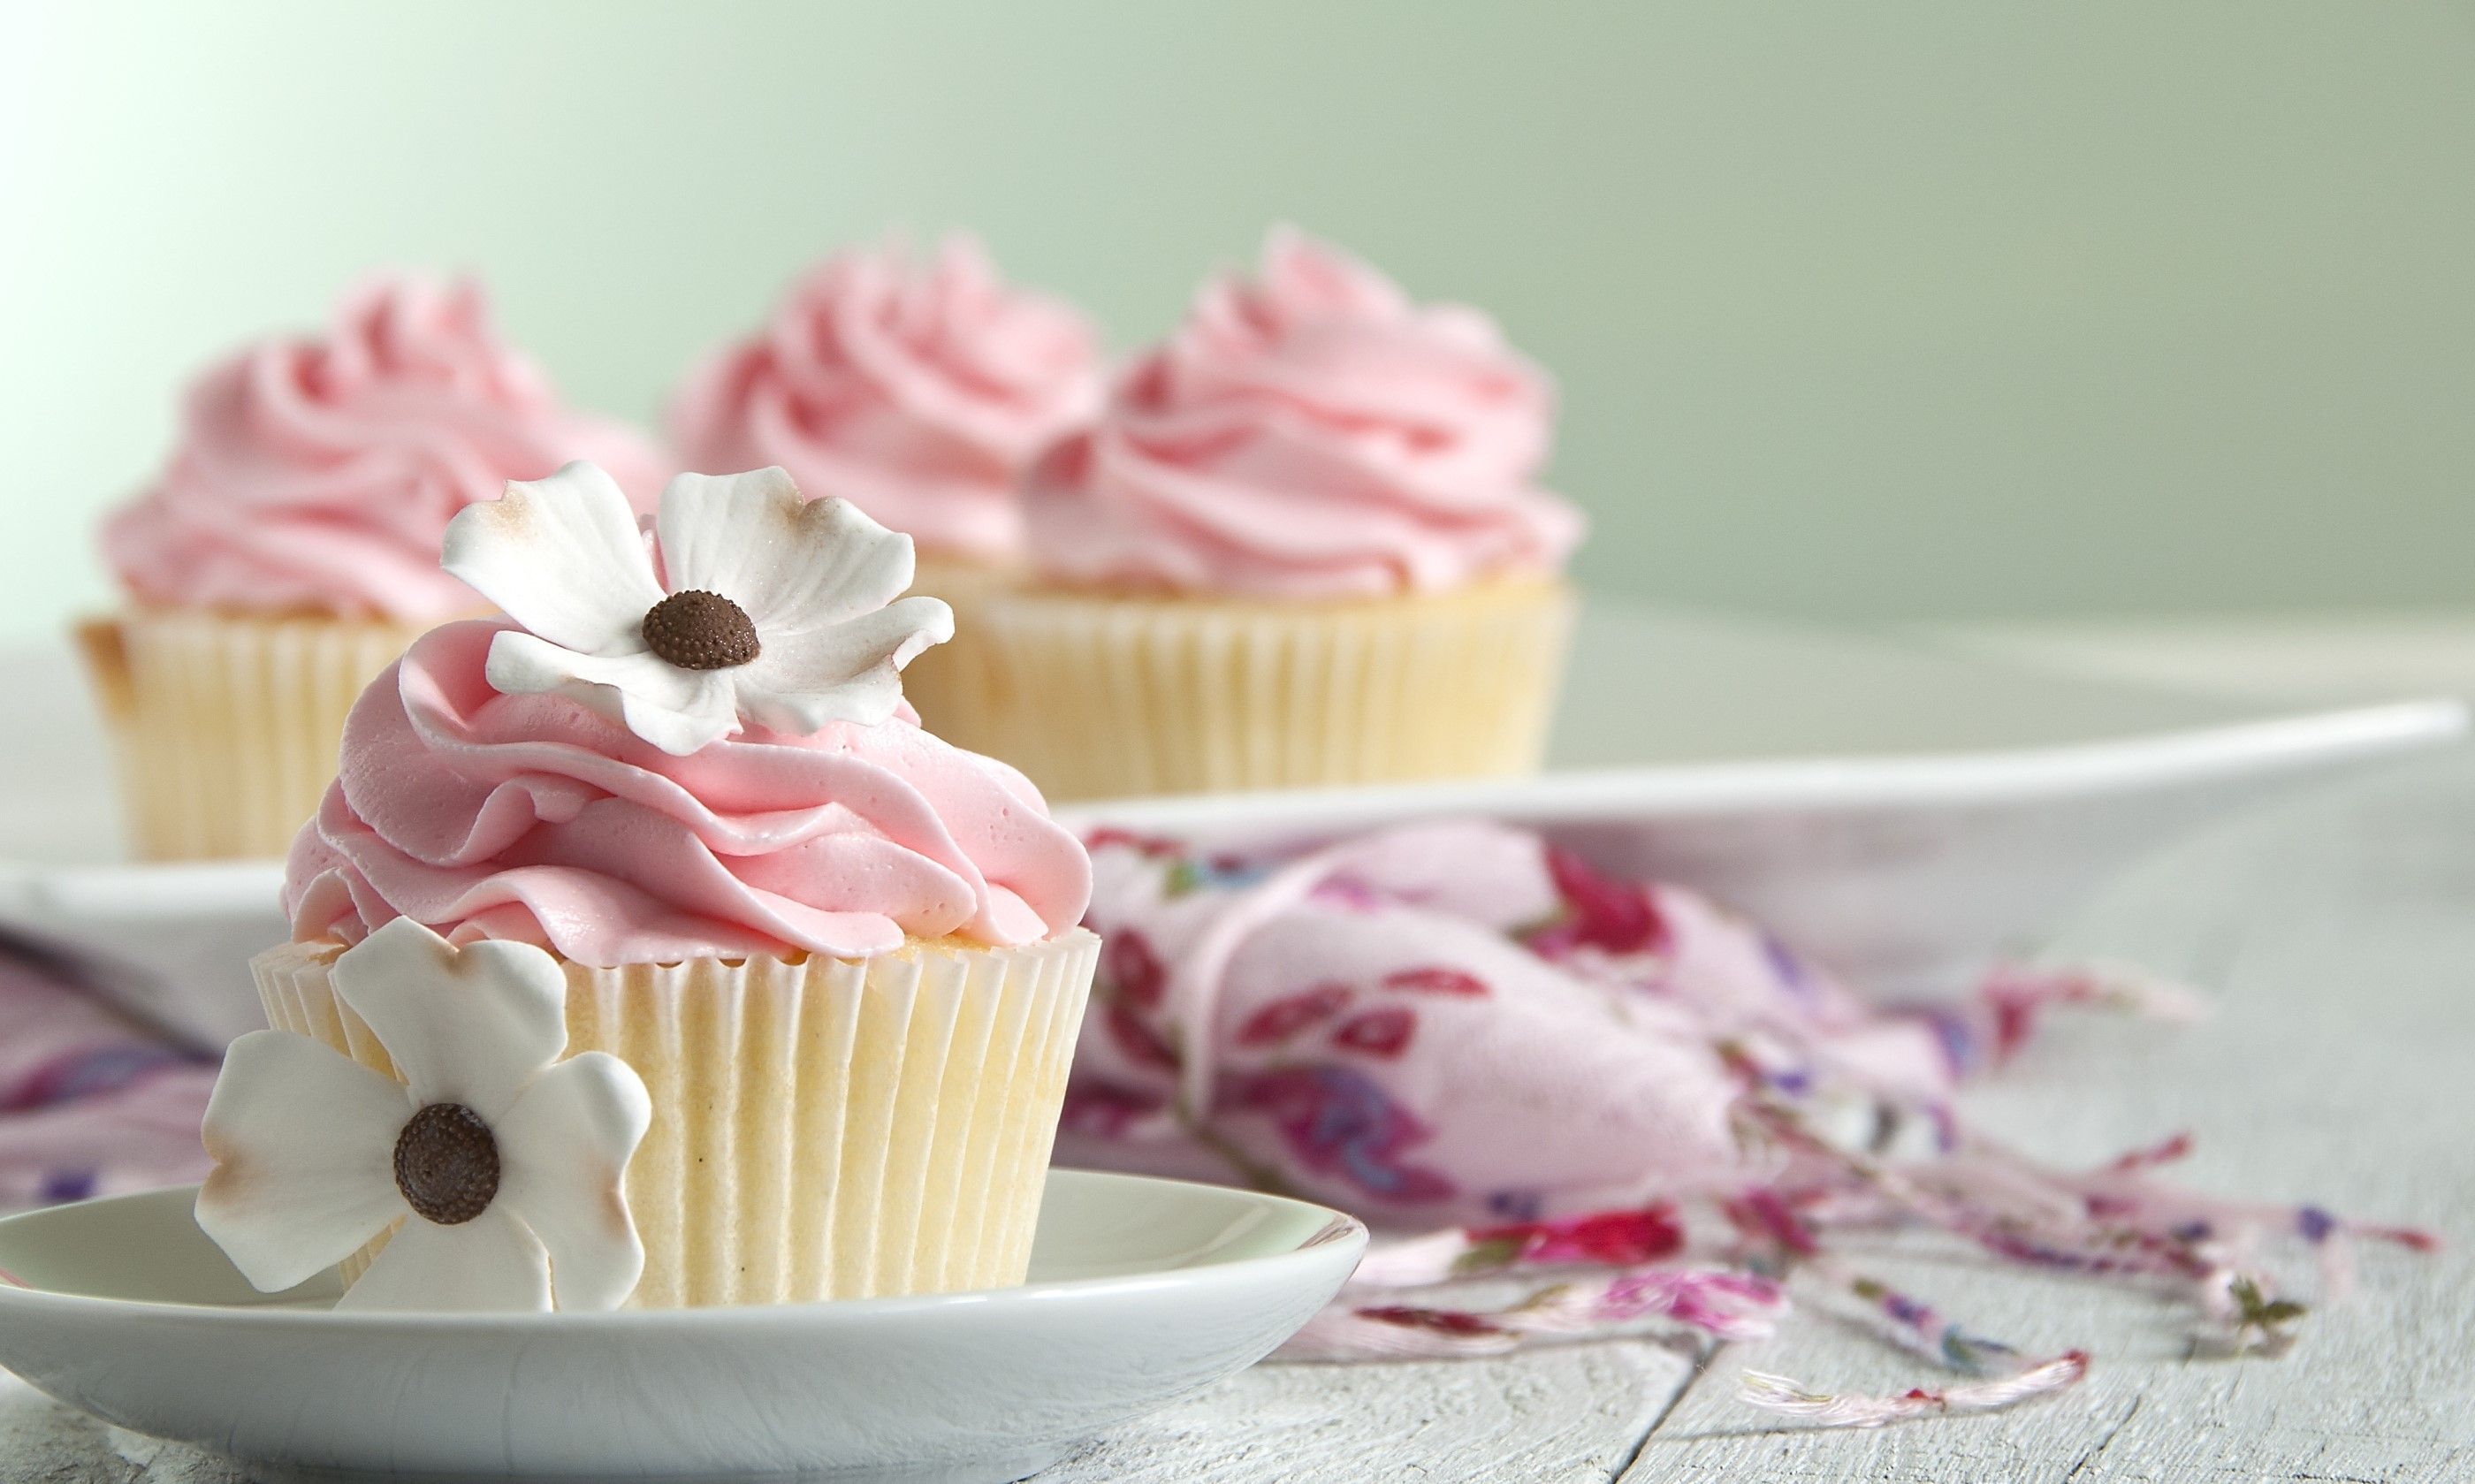 A plate of cupcakes with pink frosting and white flowers. - Cake, cupcakes